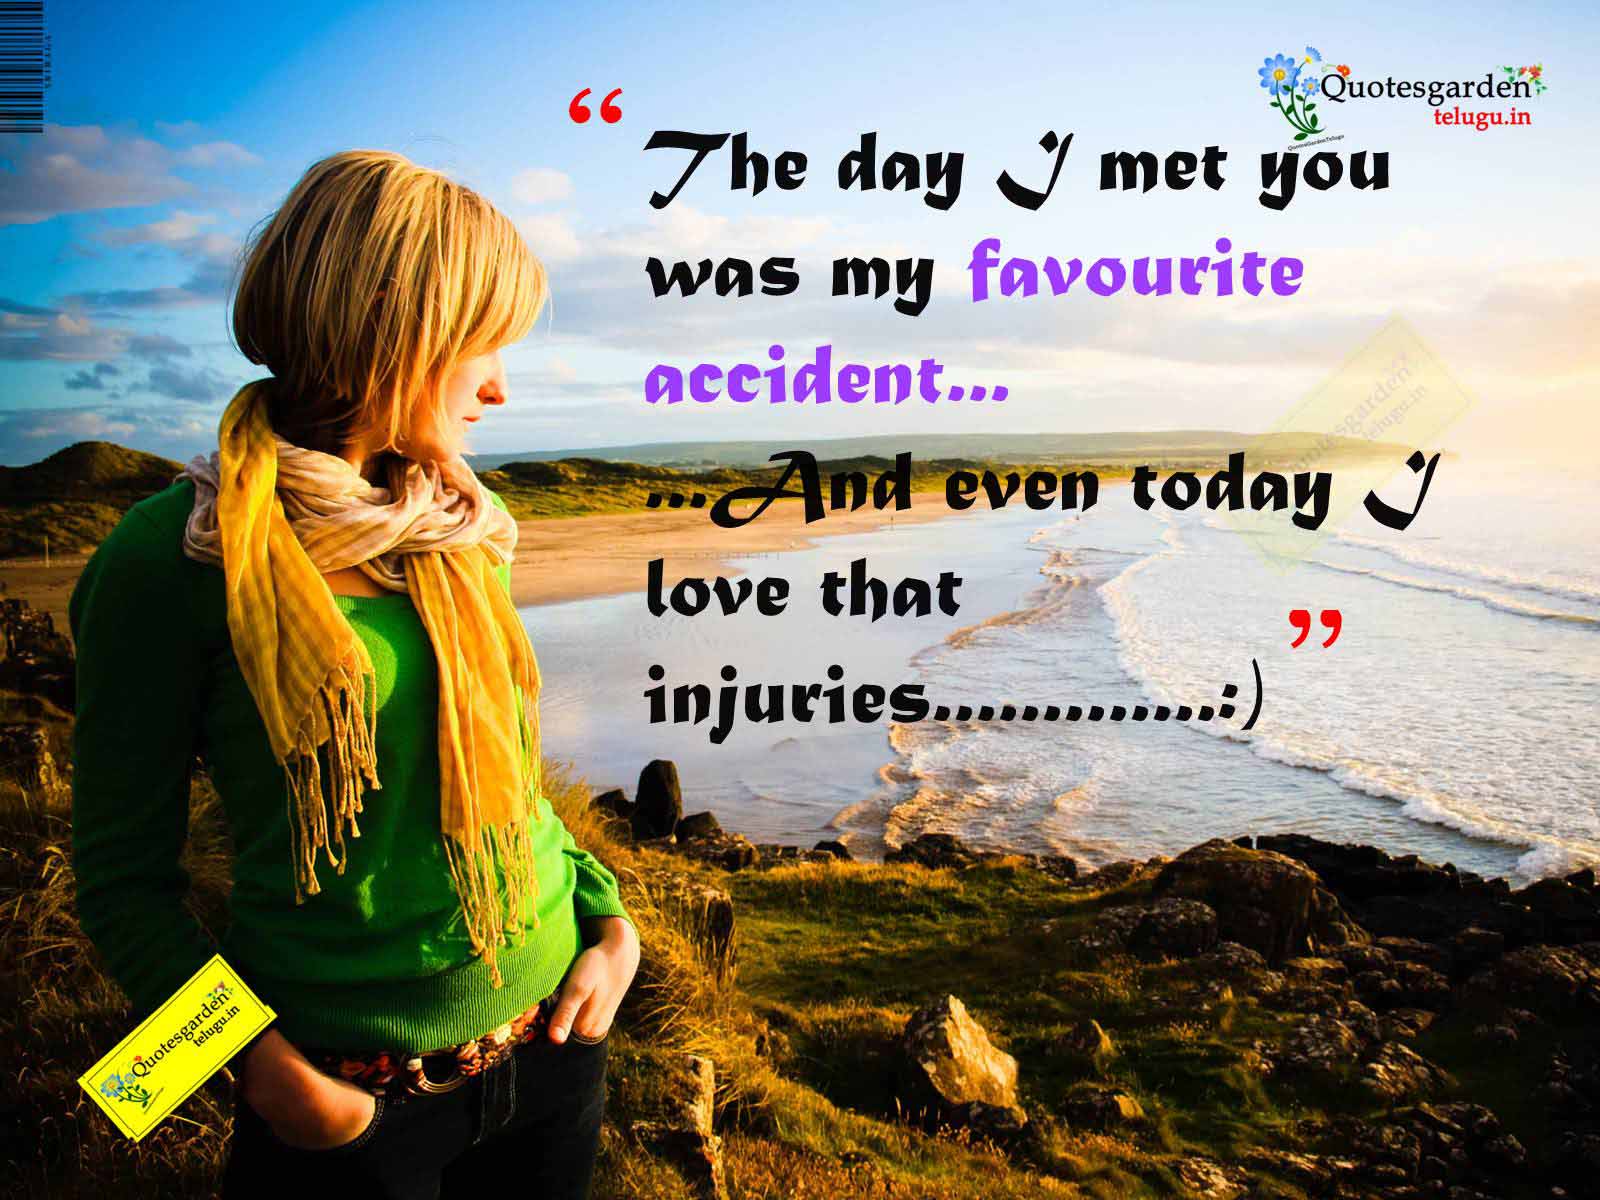 Sad Love Failure Quotes In Kannada Feeling quotes in kannada search results calendar